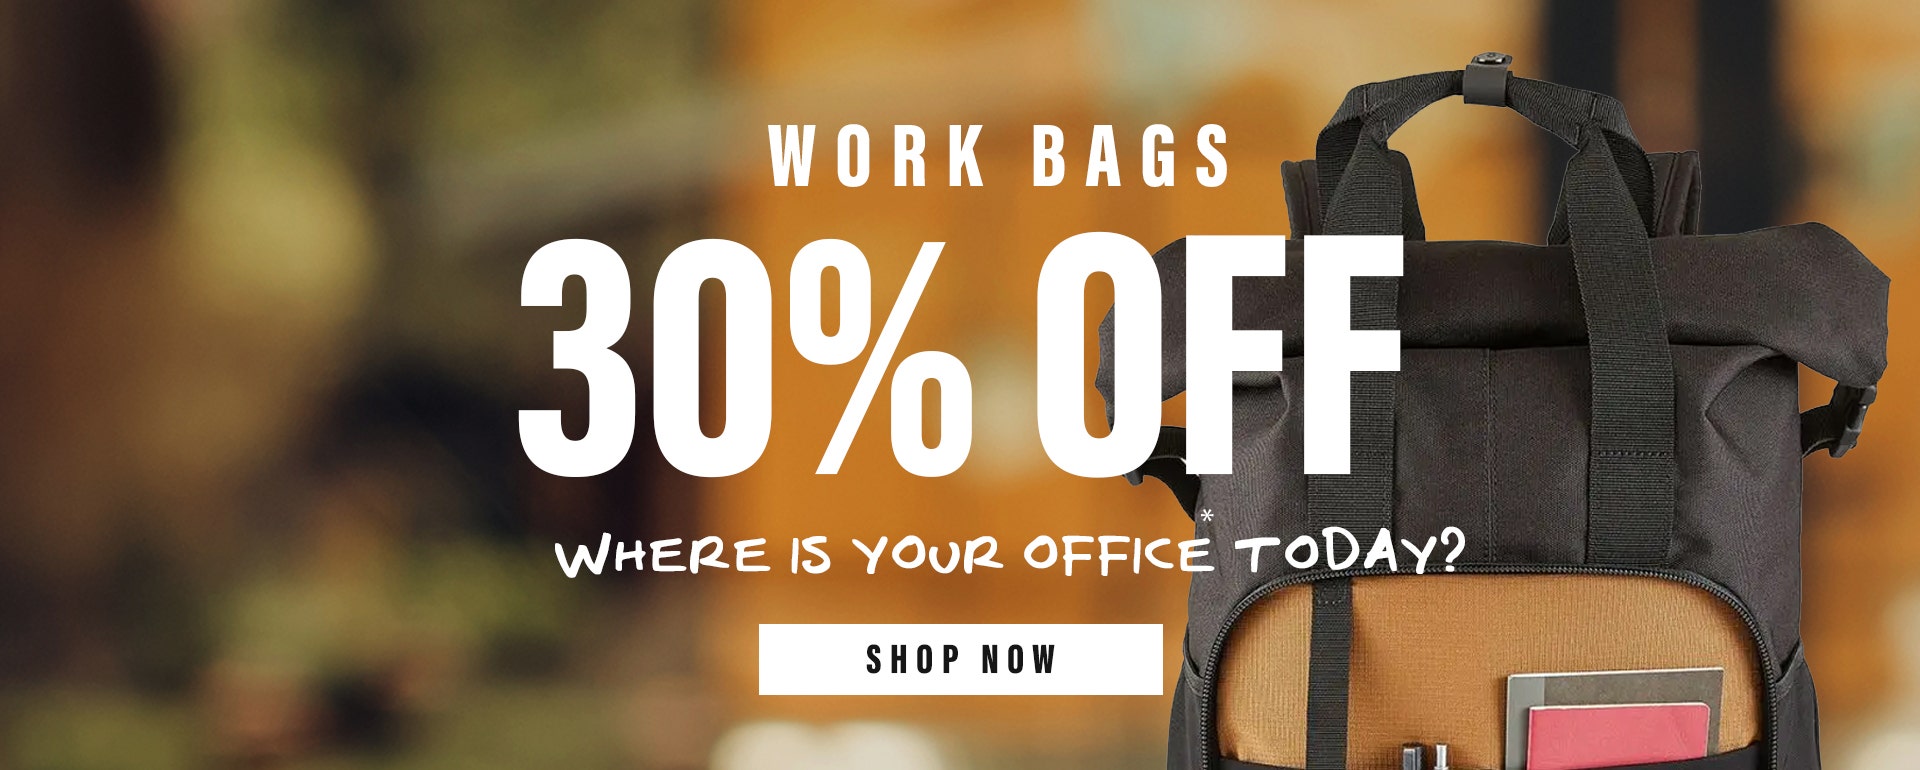 30% OFF on Work bags